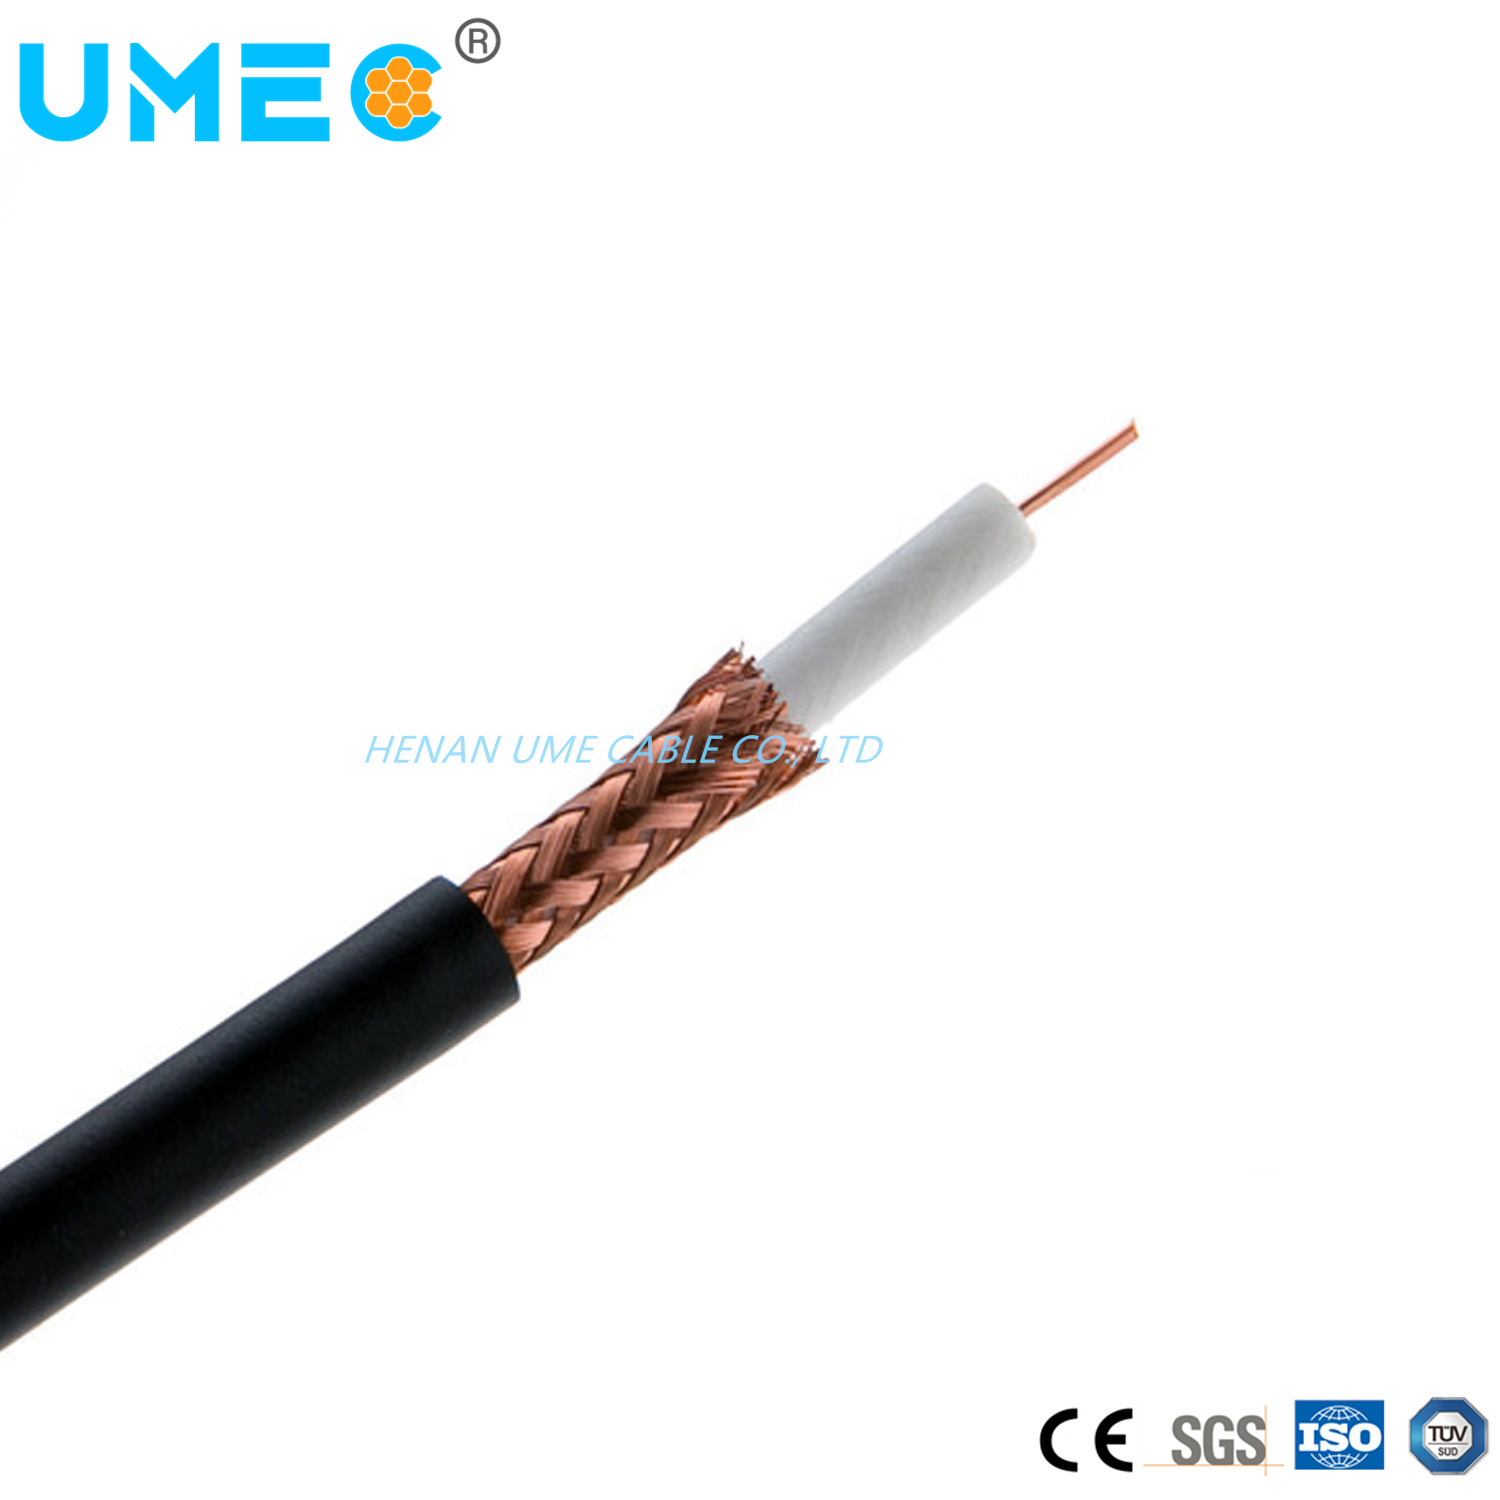 Durable Customised Rg 6 Coaxial Cable Heat Resistant Copper Coaxial Cable Heavy Duty Made in China Coaxial Cable